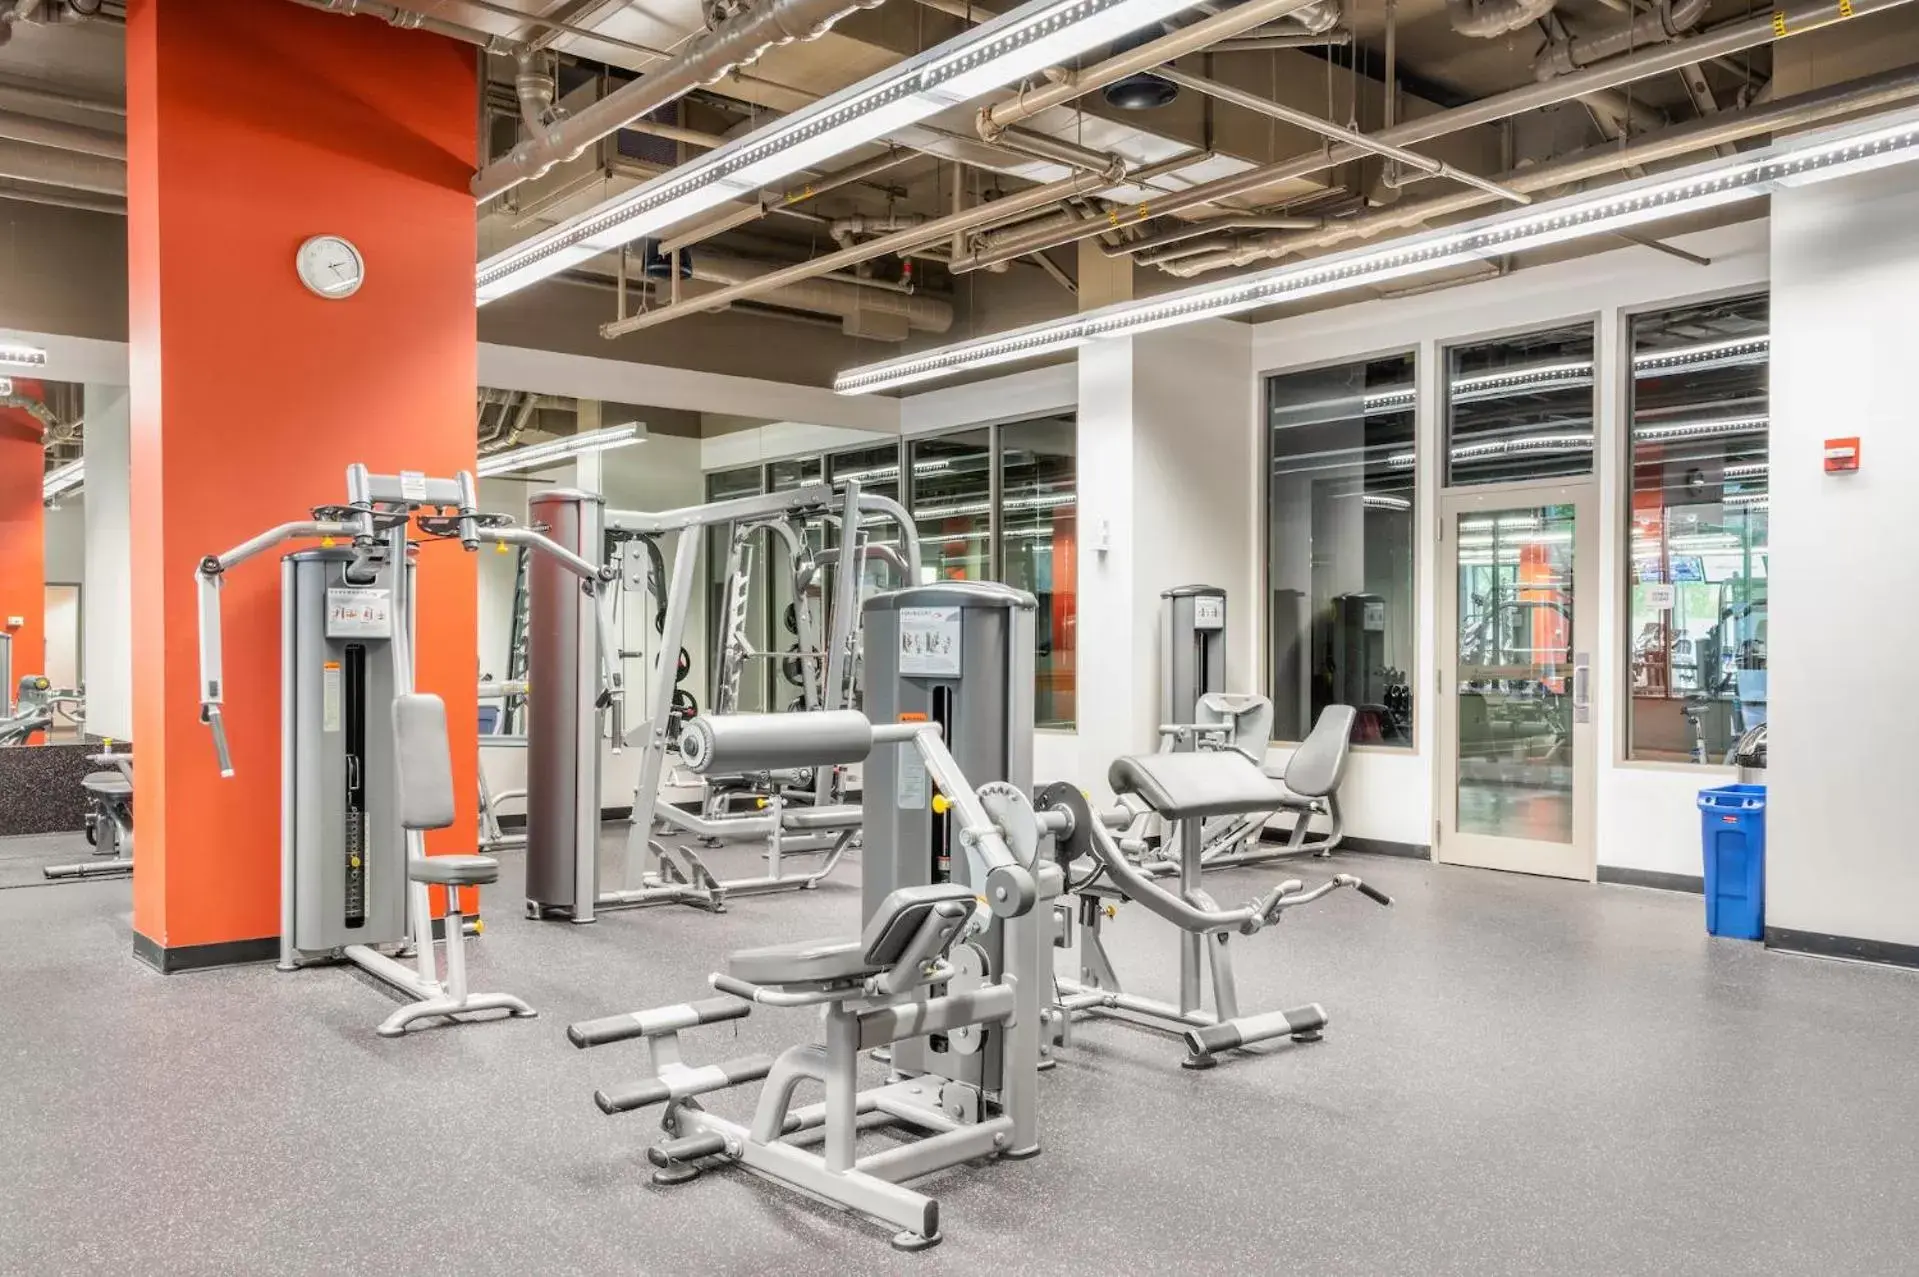 Fitness centre/facilities, Fitness Center/Facilities in Kasa South Loop Chicago